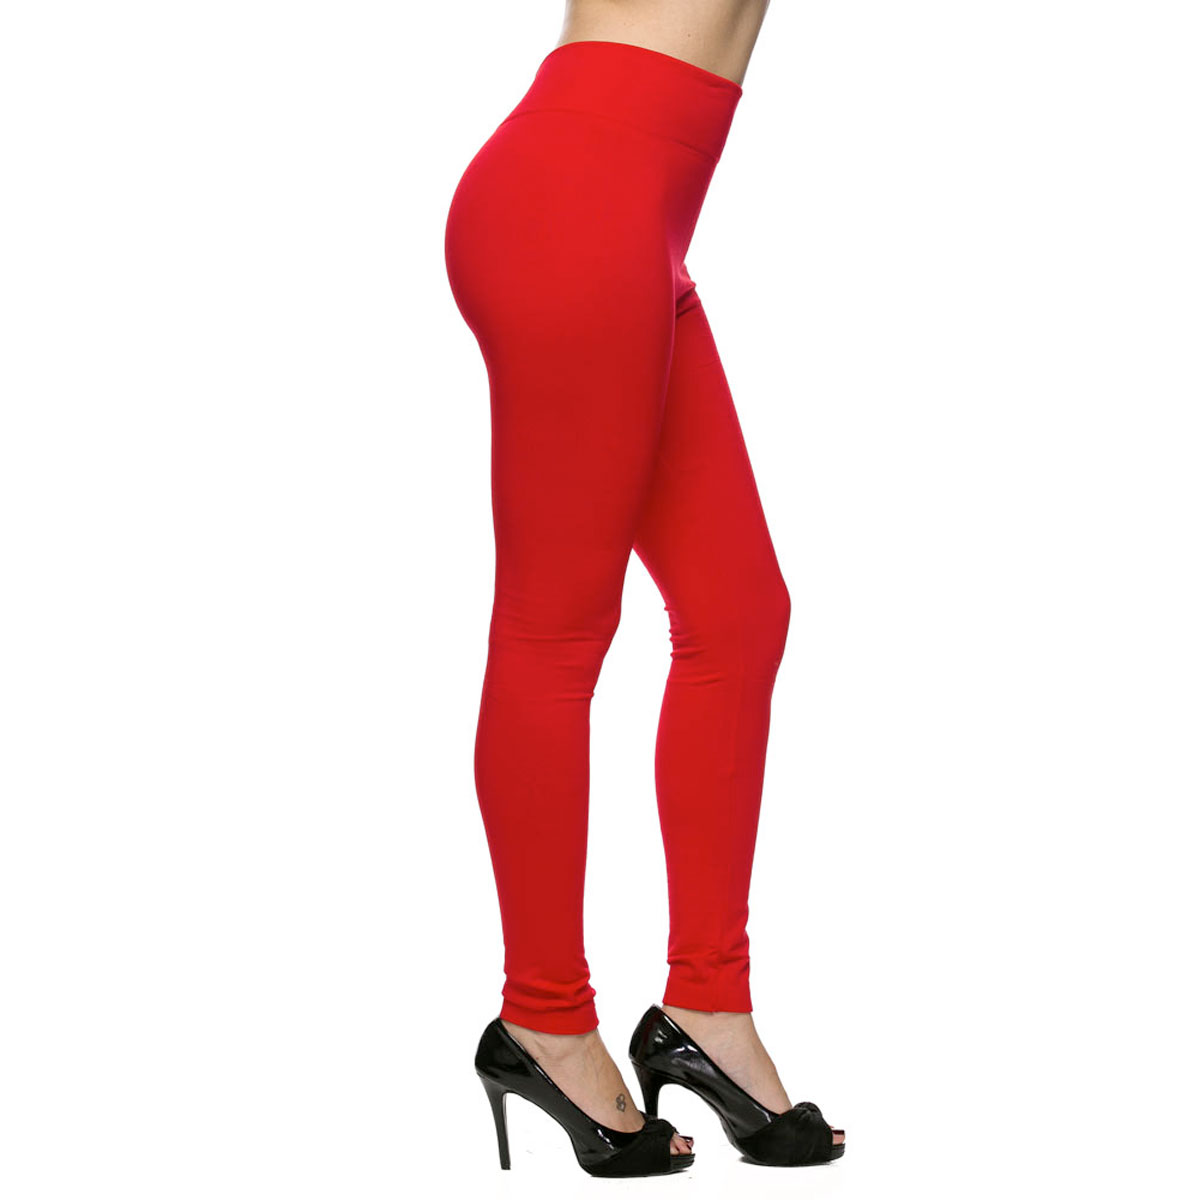 2278 - Fleece and Fur Lined Leggings Solid Red PLUS SIZE- Fleece Lined Leggings 9000  - Plus Size (XL-2X)